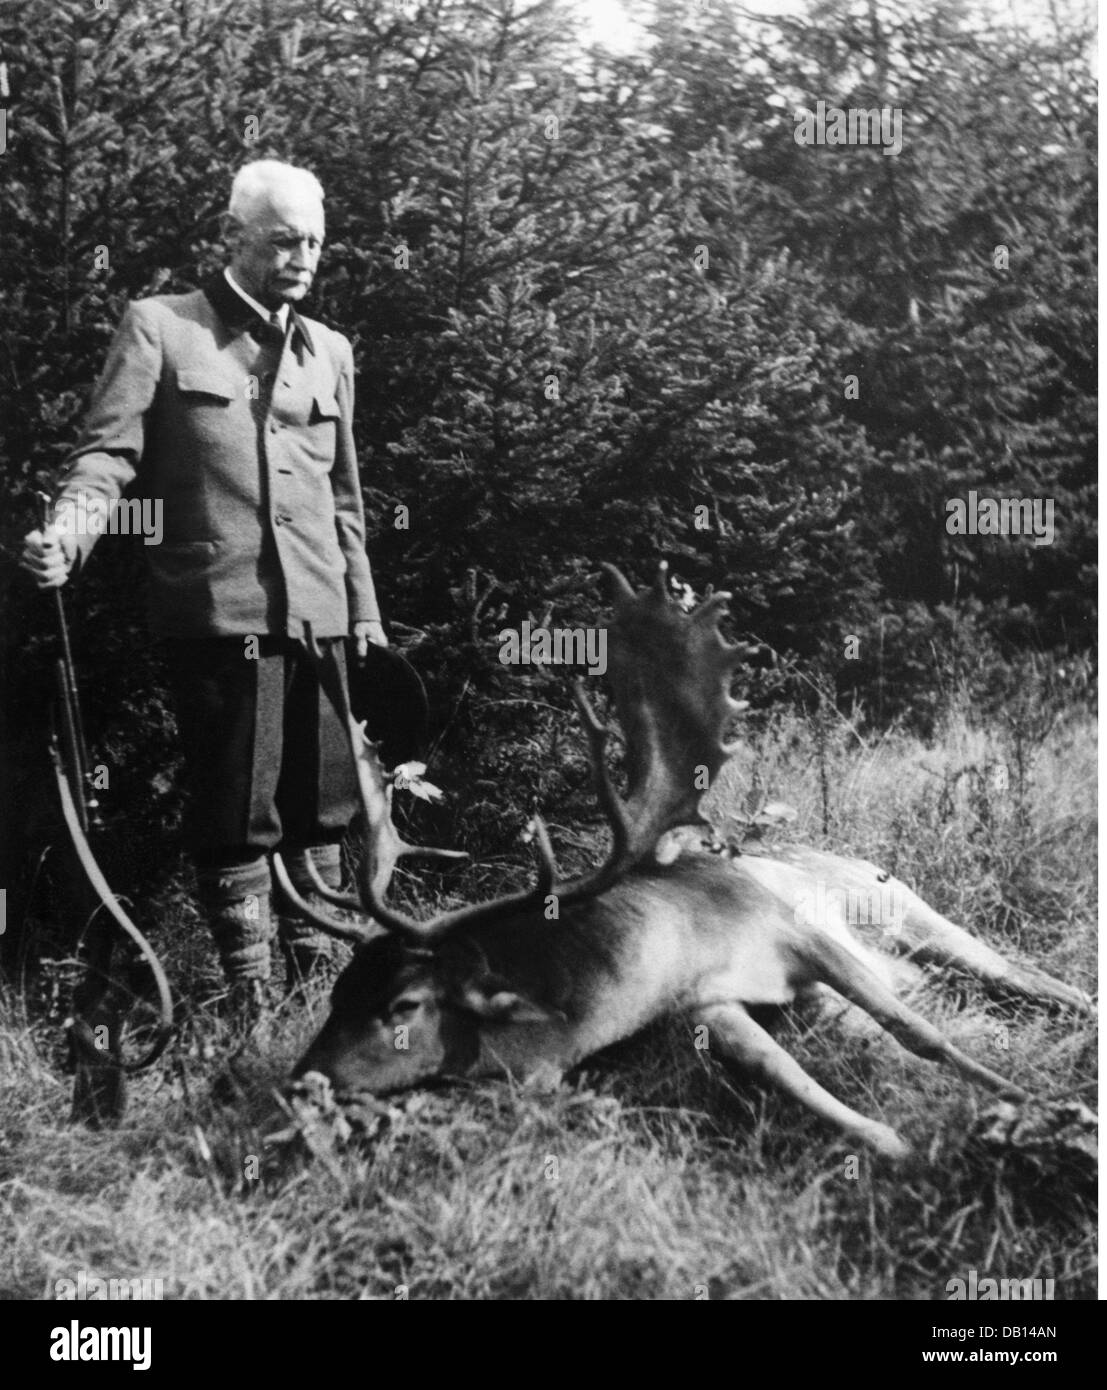 Rupert, 18.5.1869 - 2.8.1955, Crown Prince of Bavaria 4.11.1913 - 13.11.1918, hunting, with a shoot deer, Stammham, October 1953, Stock Photo